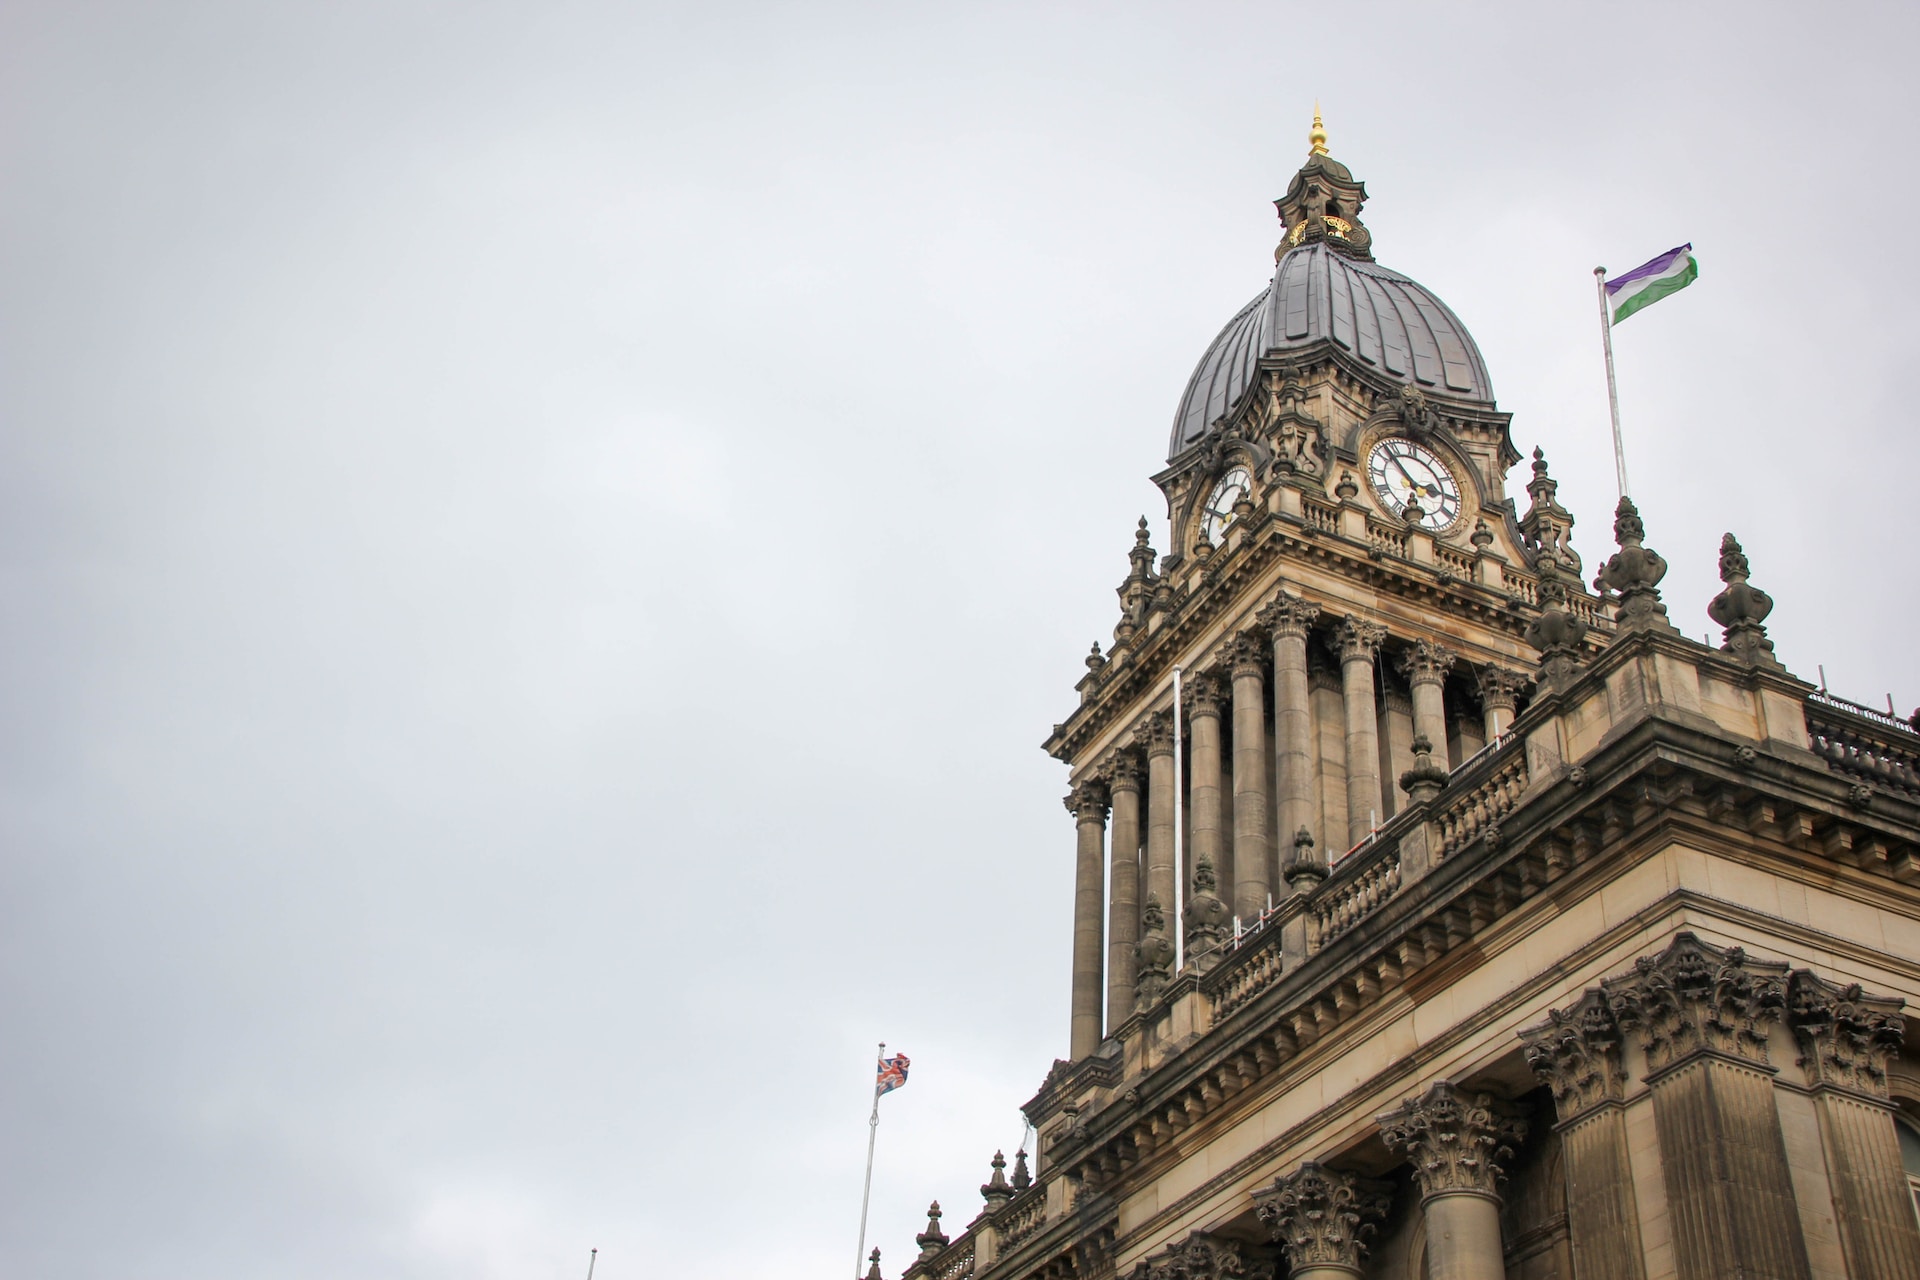 A picture of the clock on top of Leeds Town Hall, with a grey sky above it.